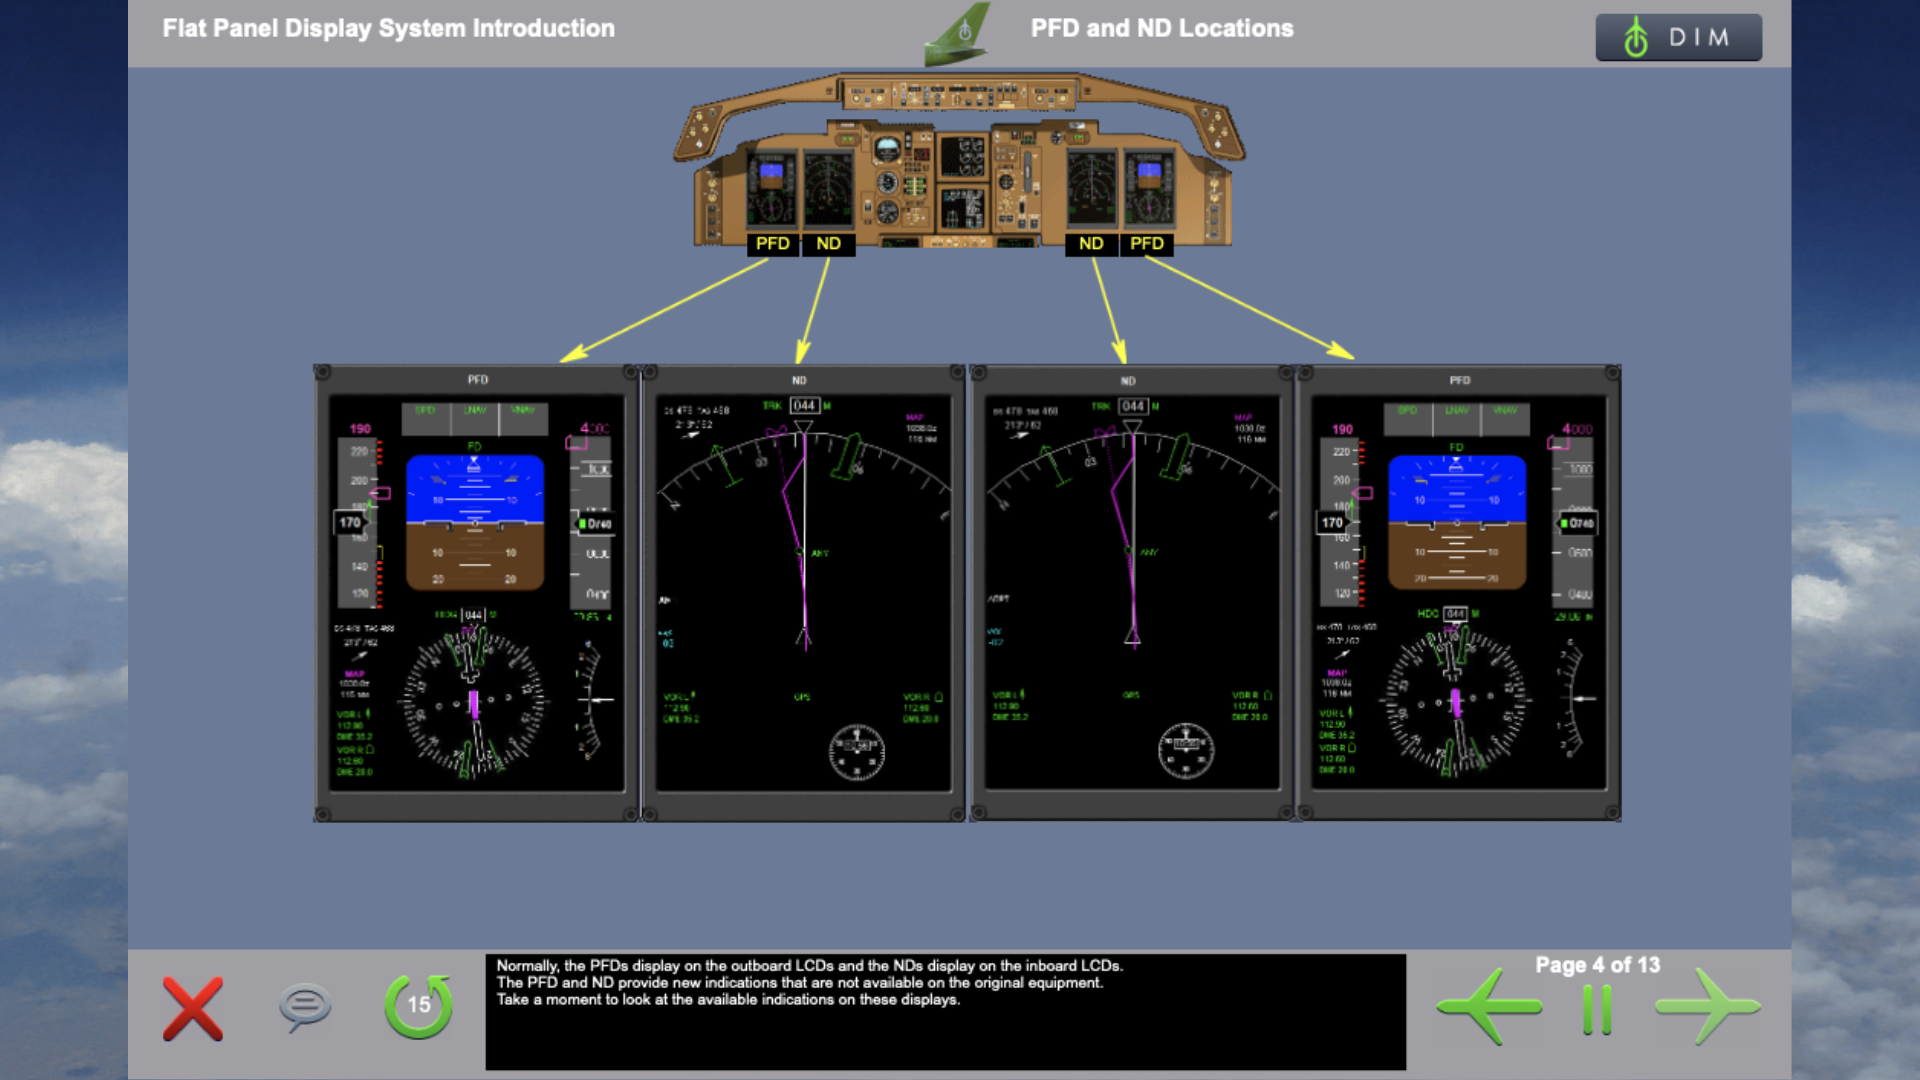 B757 FPDS _Display Locations